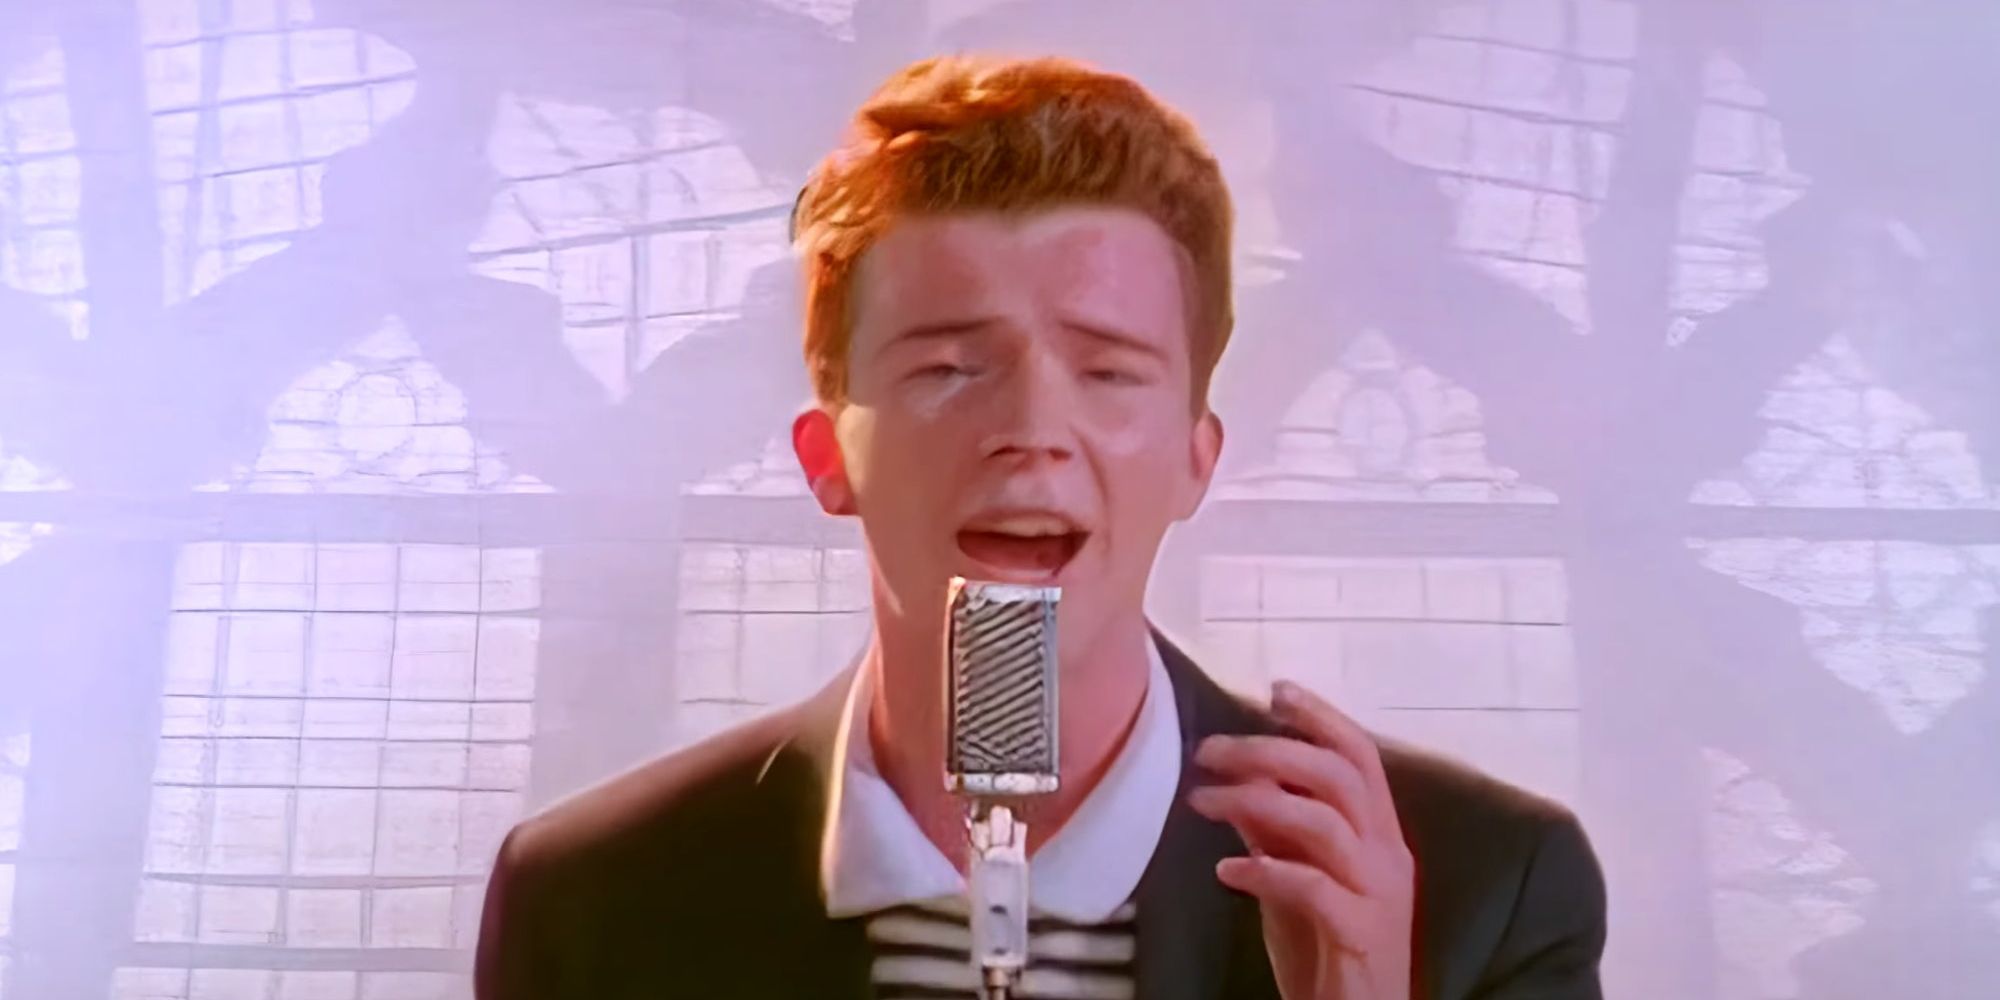 Rickrolling Is Never Gonna Give You Up After Passing 1B  Views